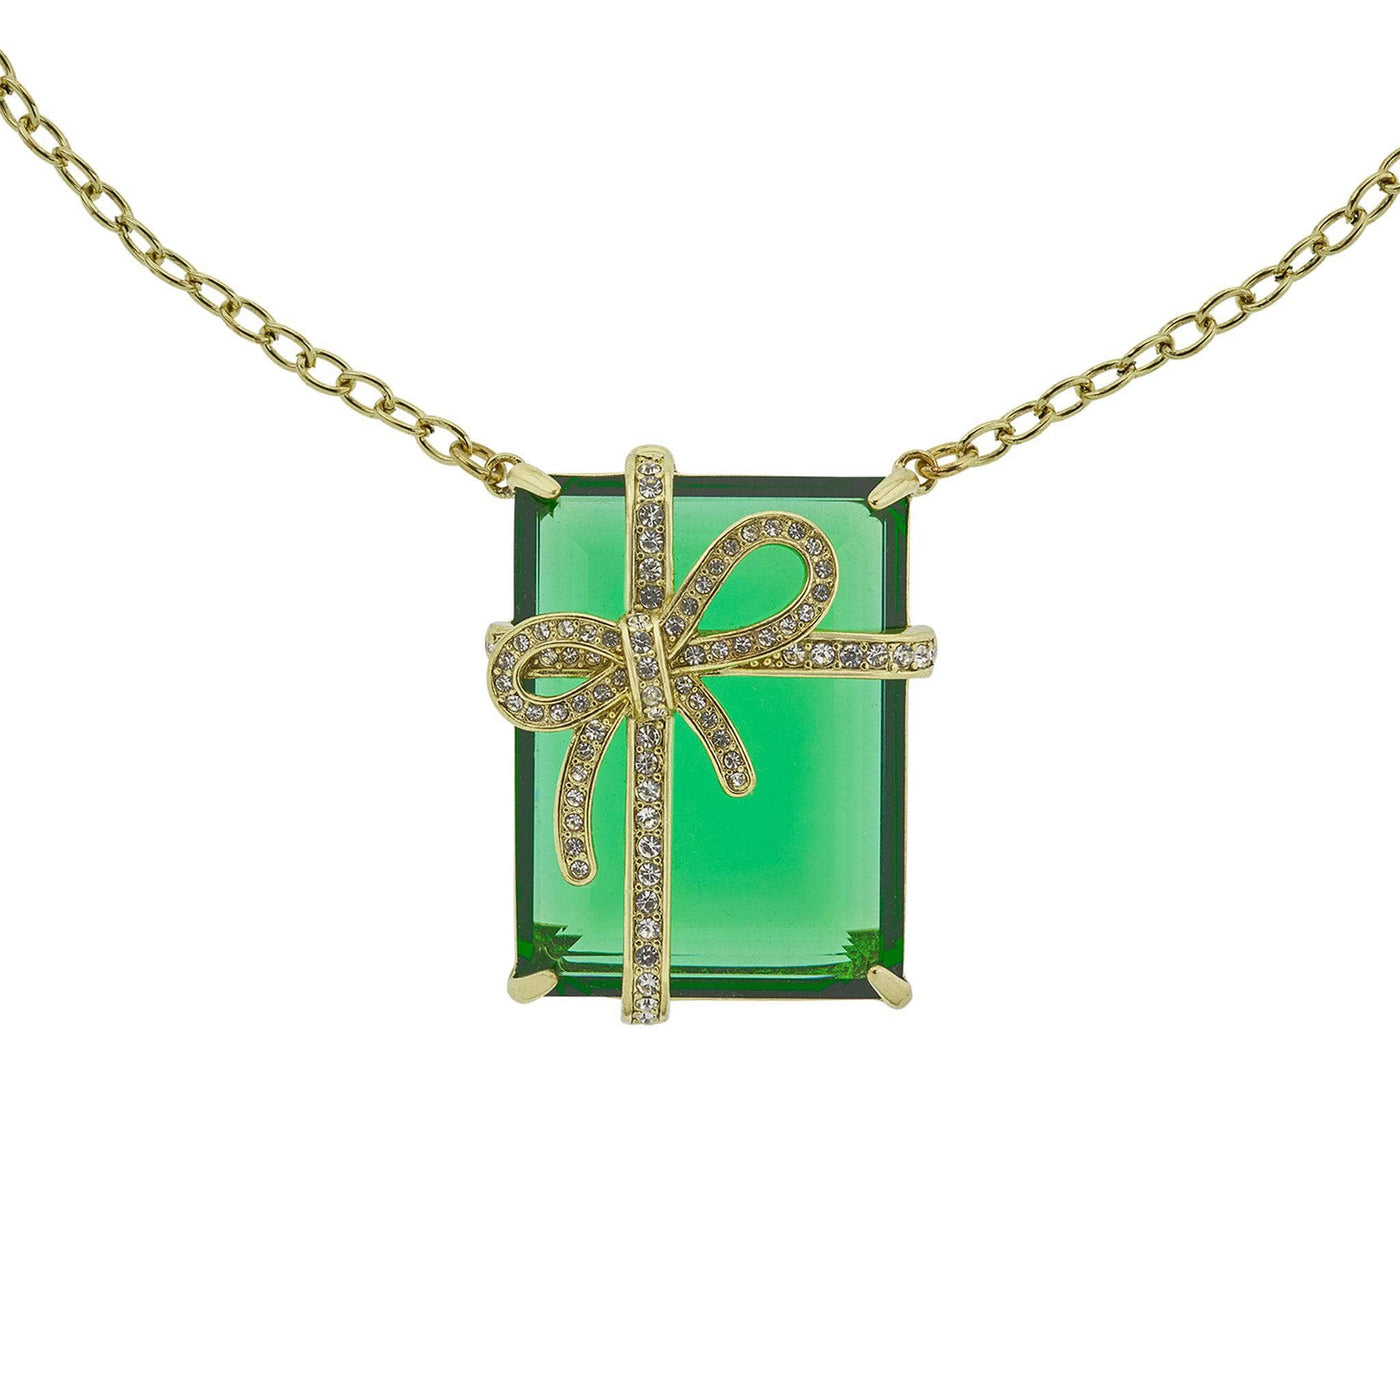 HEIDI DAUS®"Bow Wrapture" Crystal & Chain Gift Necklace